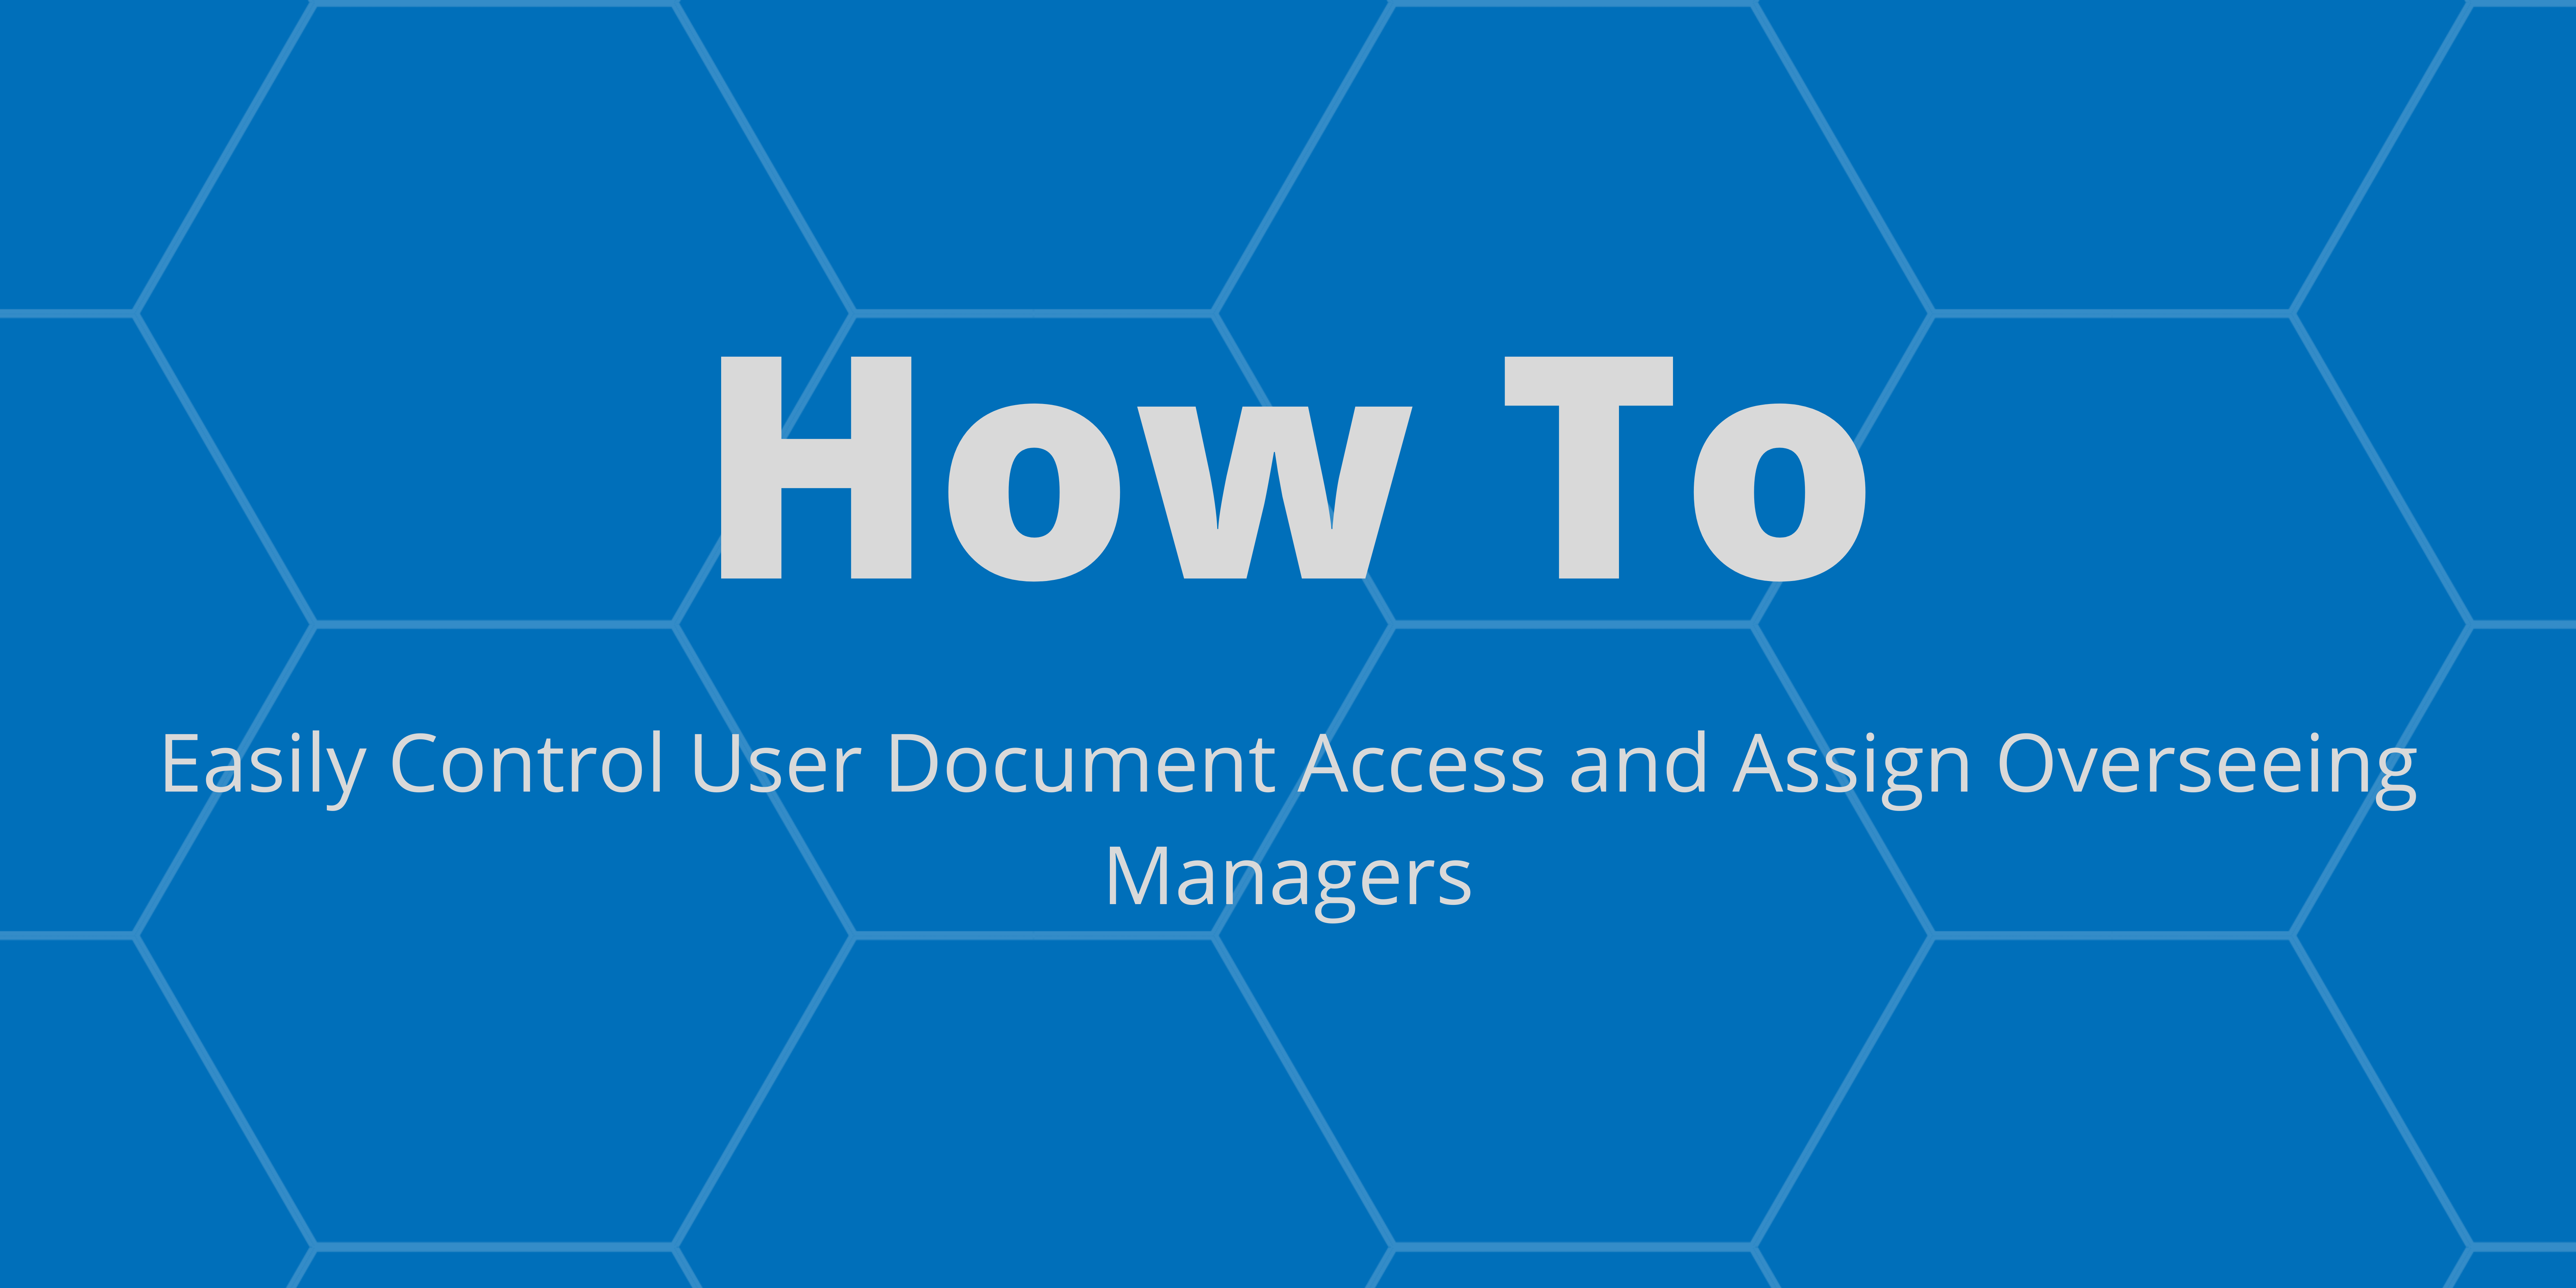 How To Easily Control User Document Access and Assign Overseeing Managers